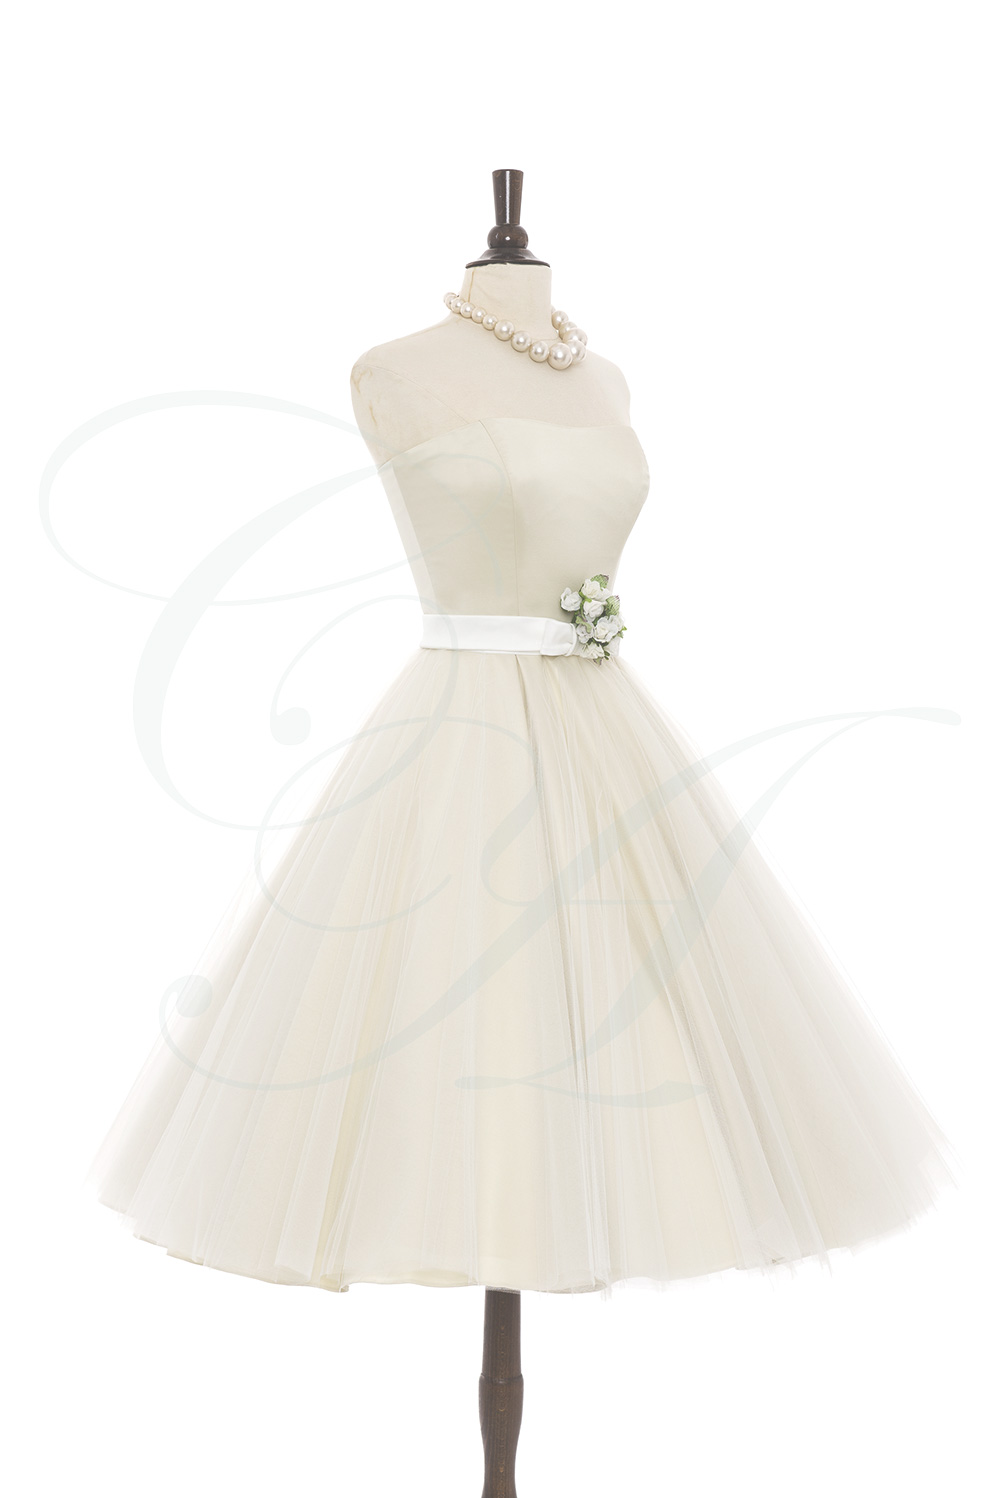 dreamytulle1 - Dreamy Tulle Candy Anthony Dress